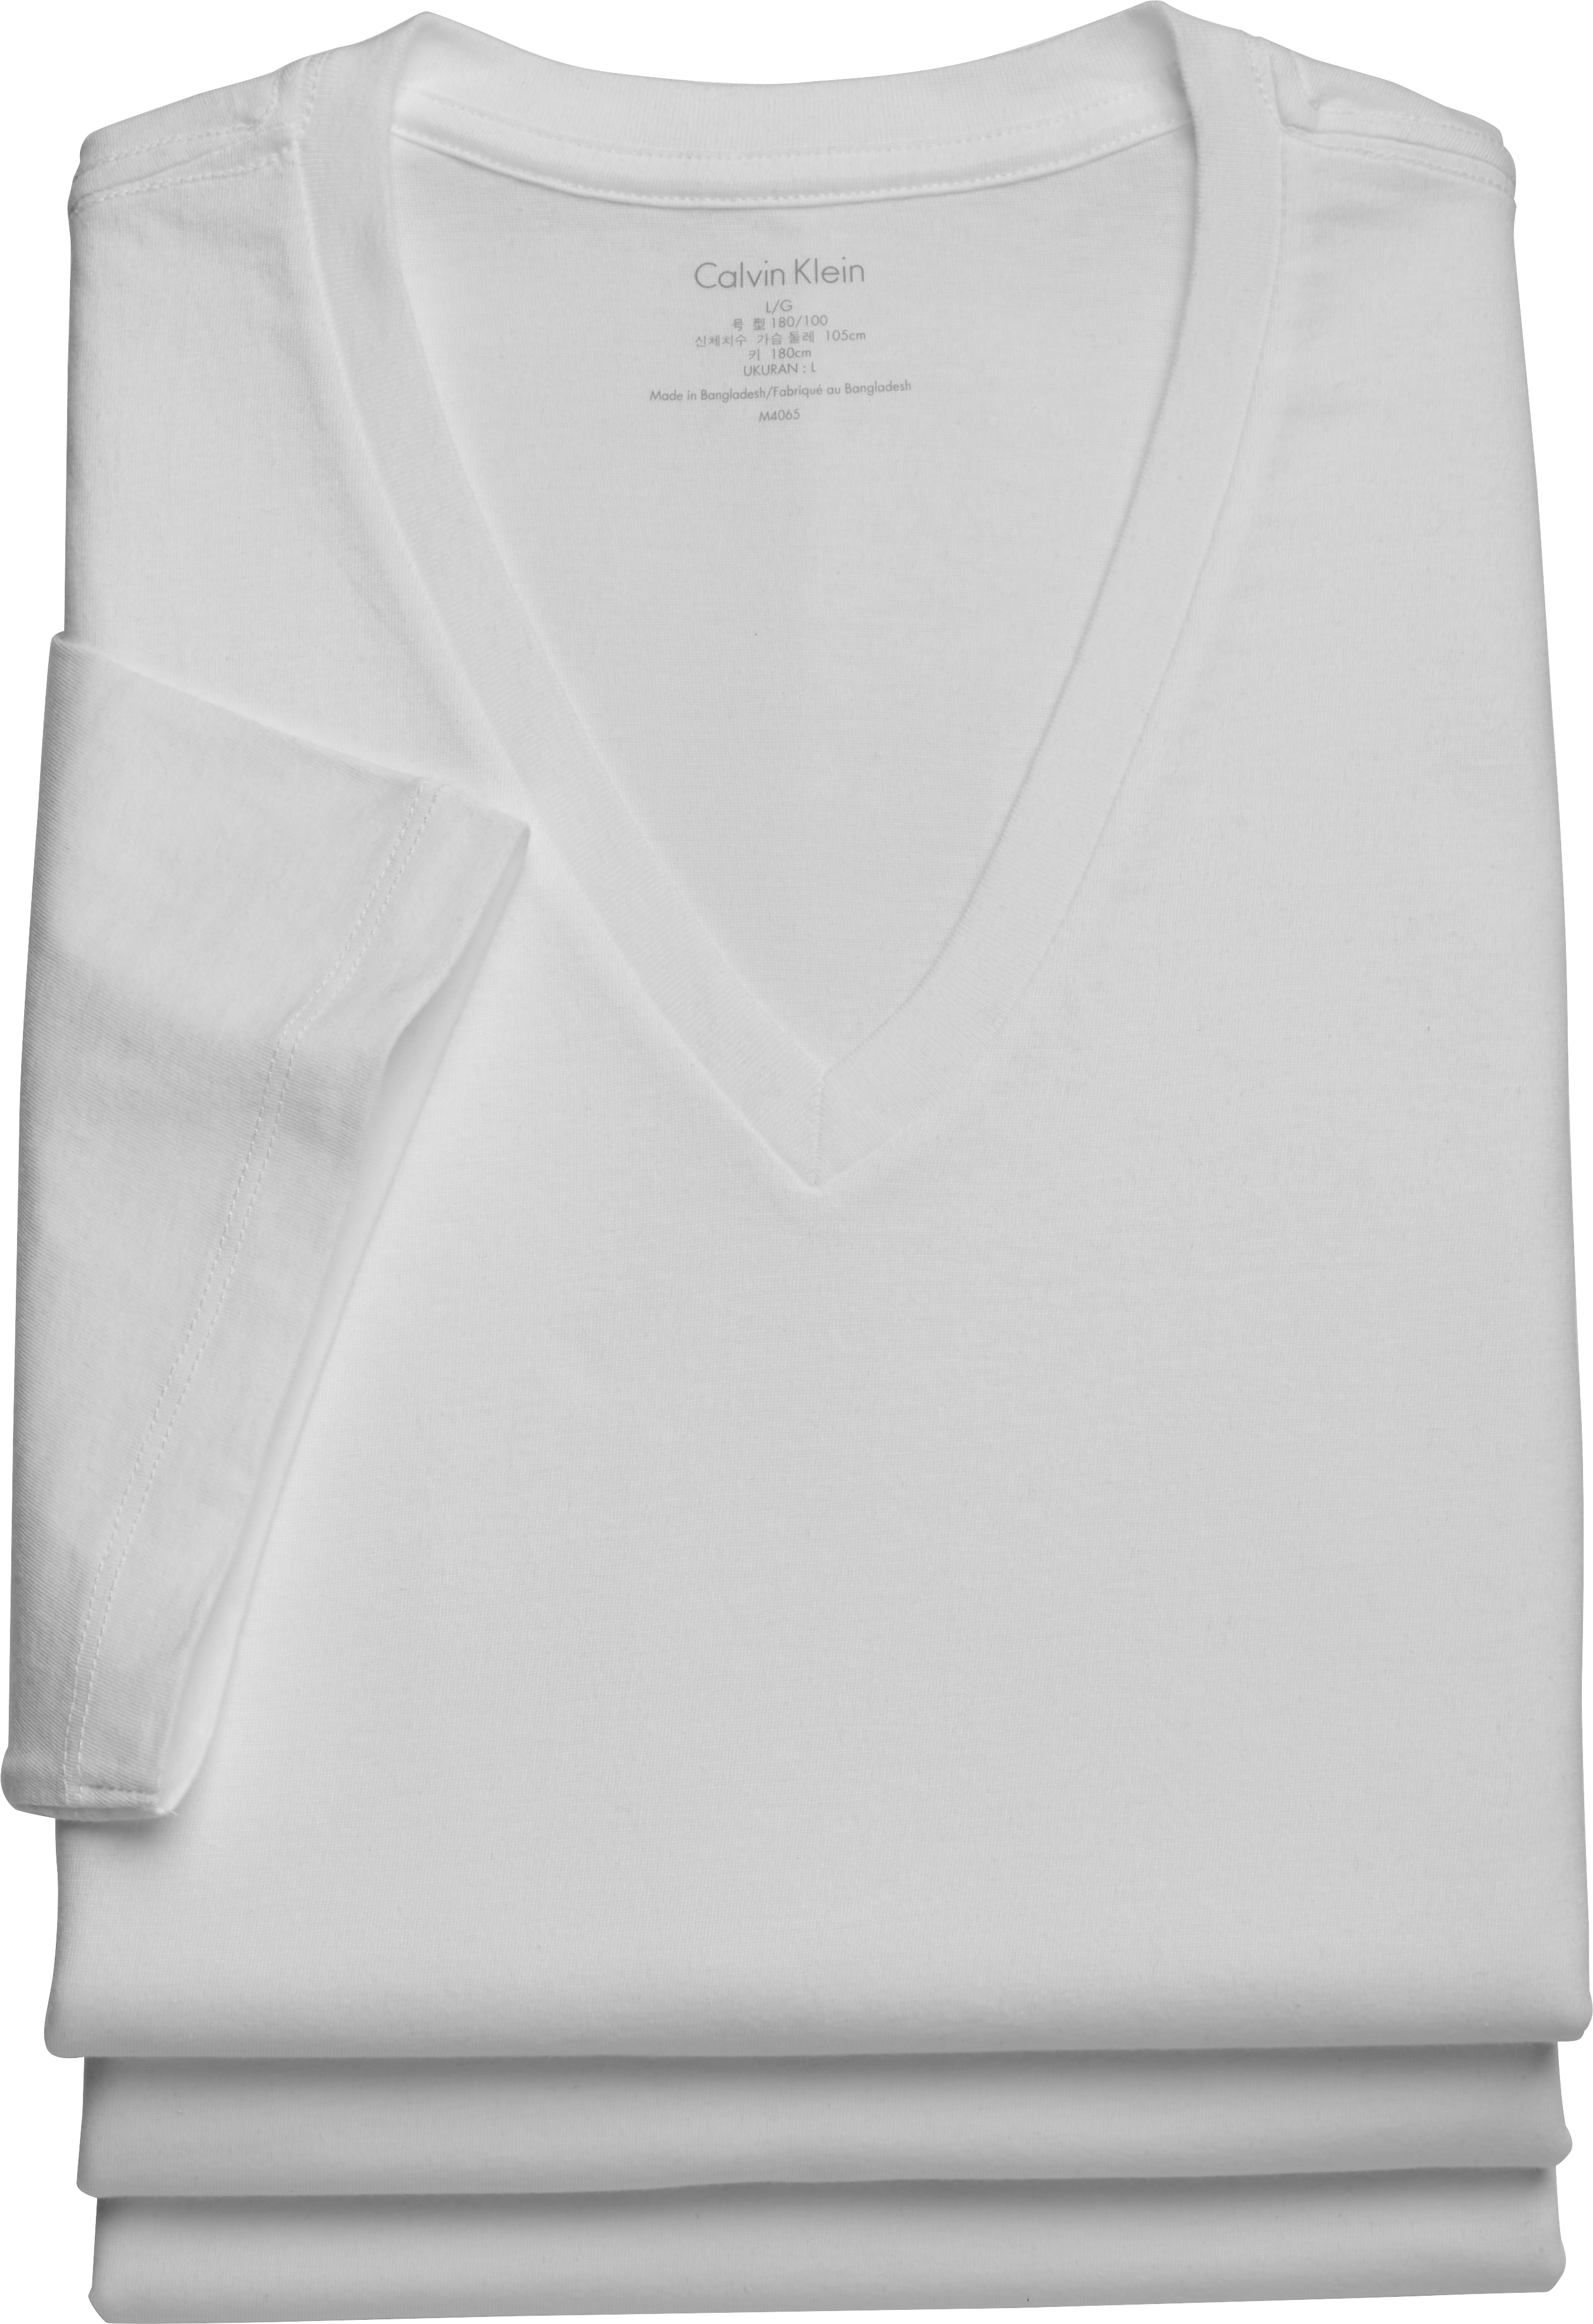 Cotton Stretch Classic Fit V-Neck T-Shirt - 3 Pack by Calvin Klein